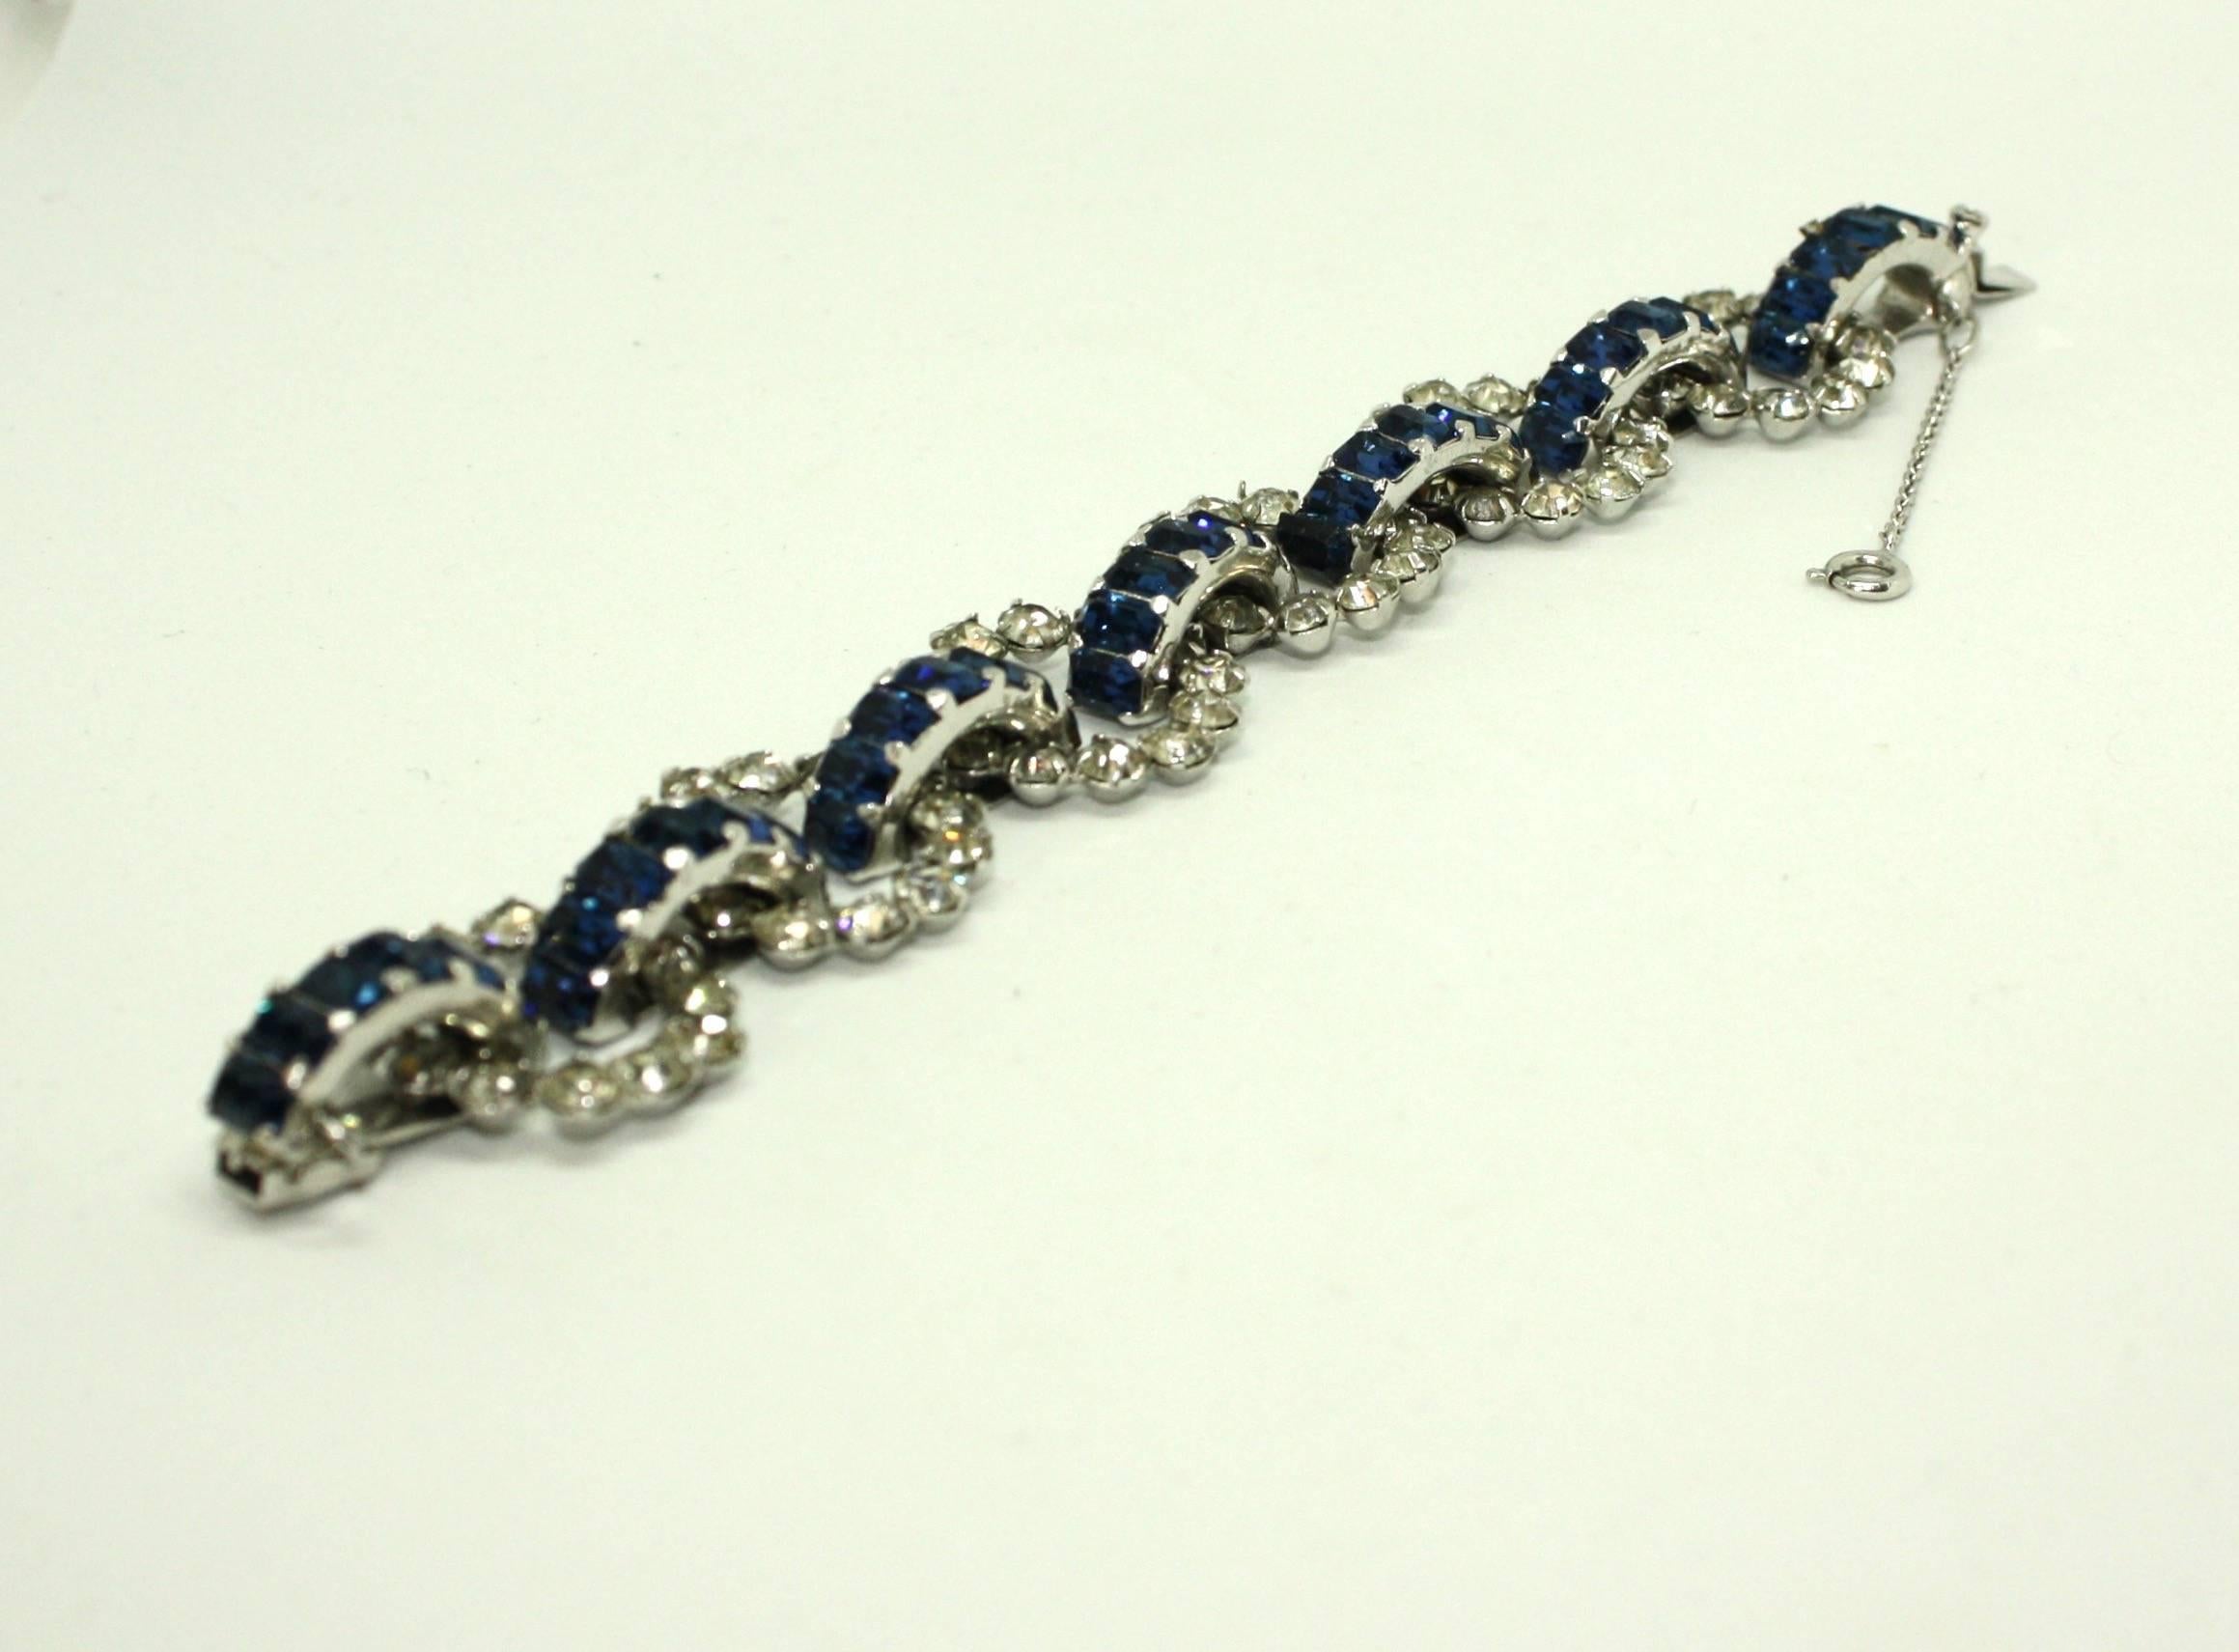 A beautiful sapphire blue and white diamante stone bracelet by Mitchel Maer for Christian Dior. Claw set stones circular stones are linked by bridges of beautiful deep blue baguettes. The bracelet features a safety chain and box-tongue clasp. It is